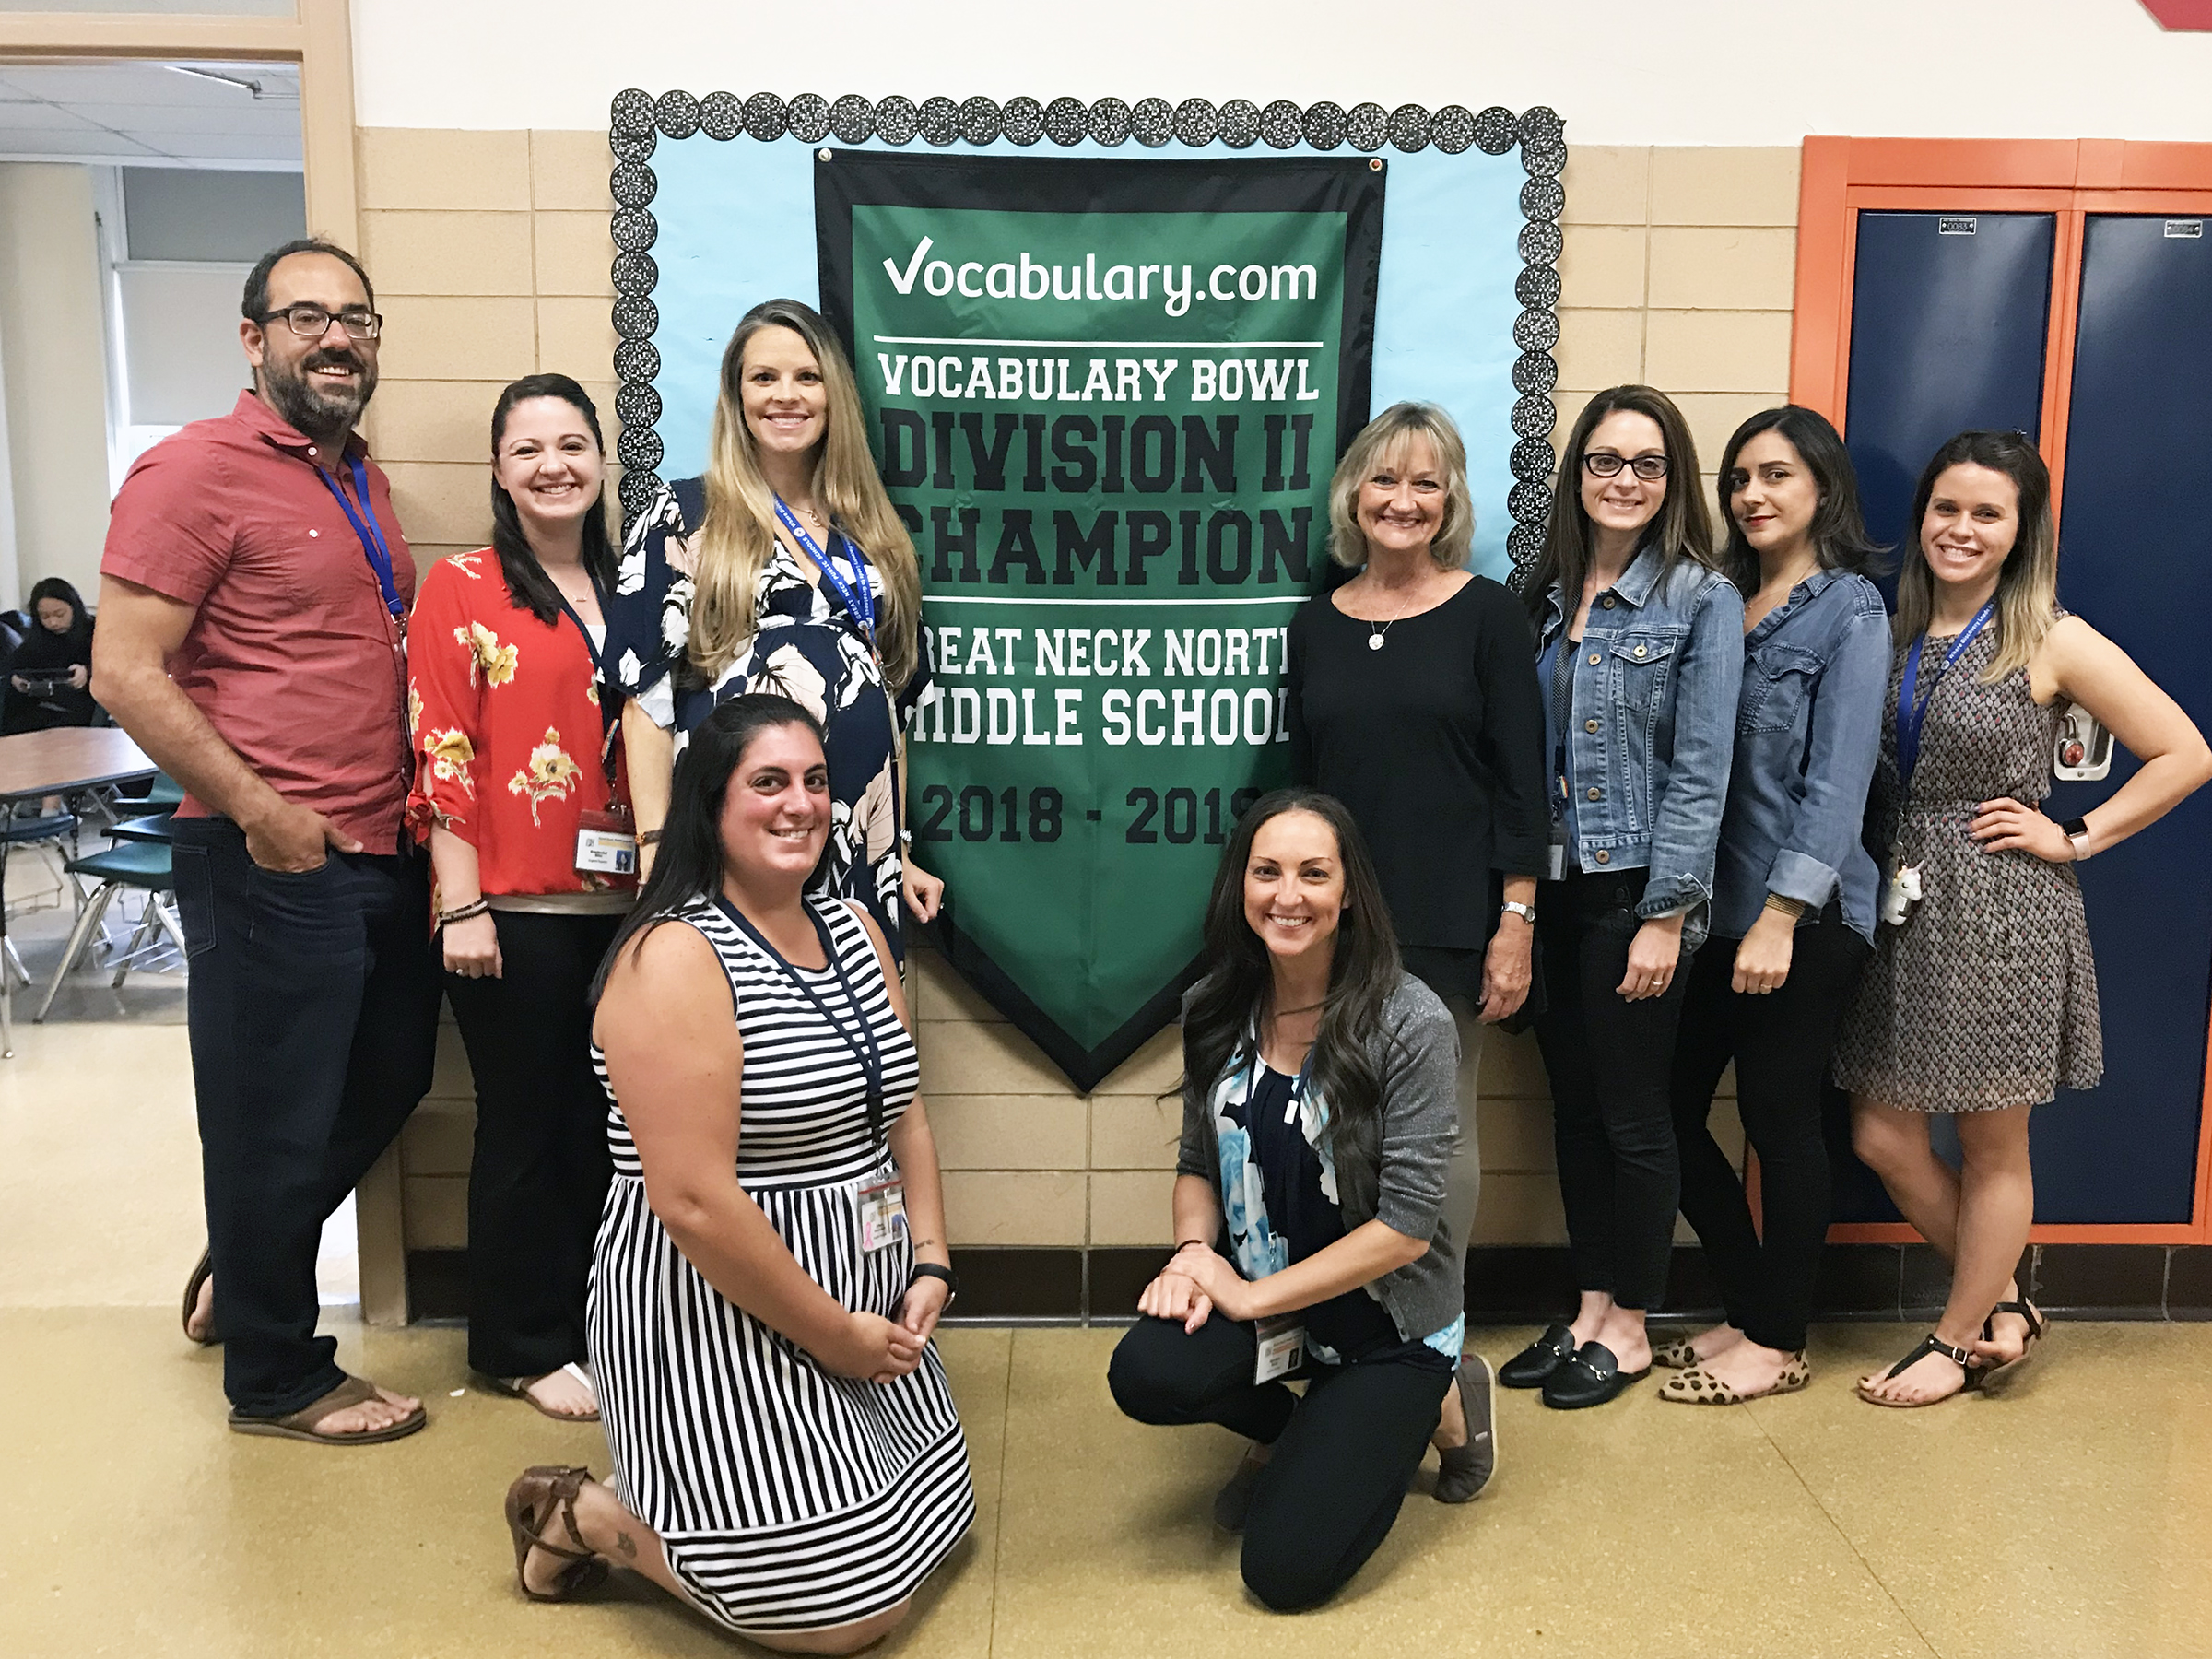 Members of the North Middle English department are photographed with the school’s Vocabulary Bowl championship banner. (Photo courtesy of Great Neck Public Schools)